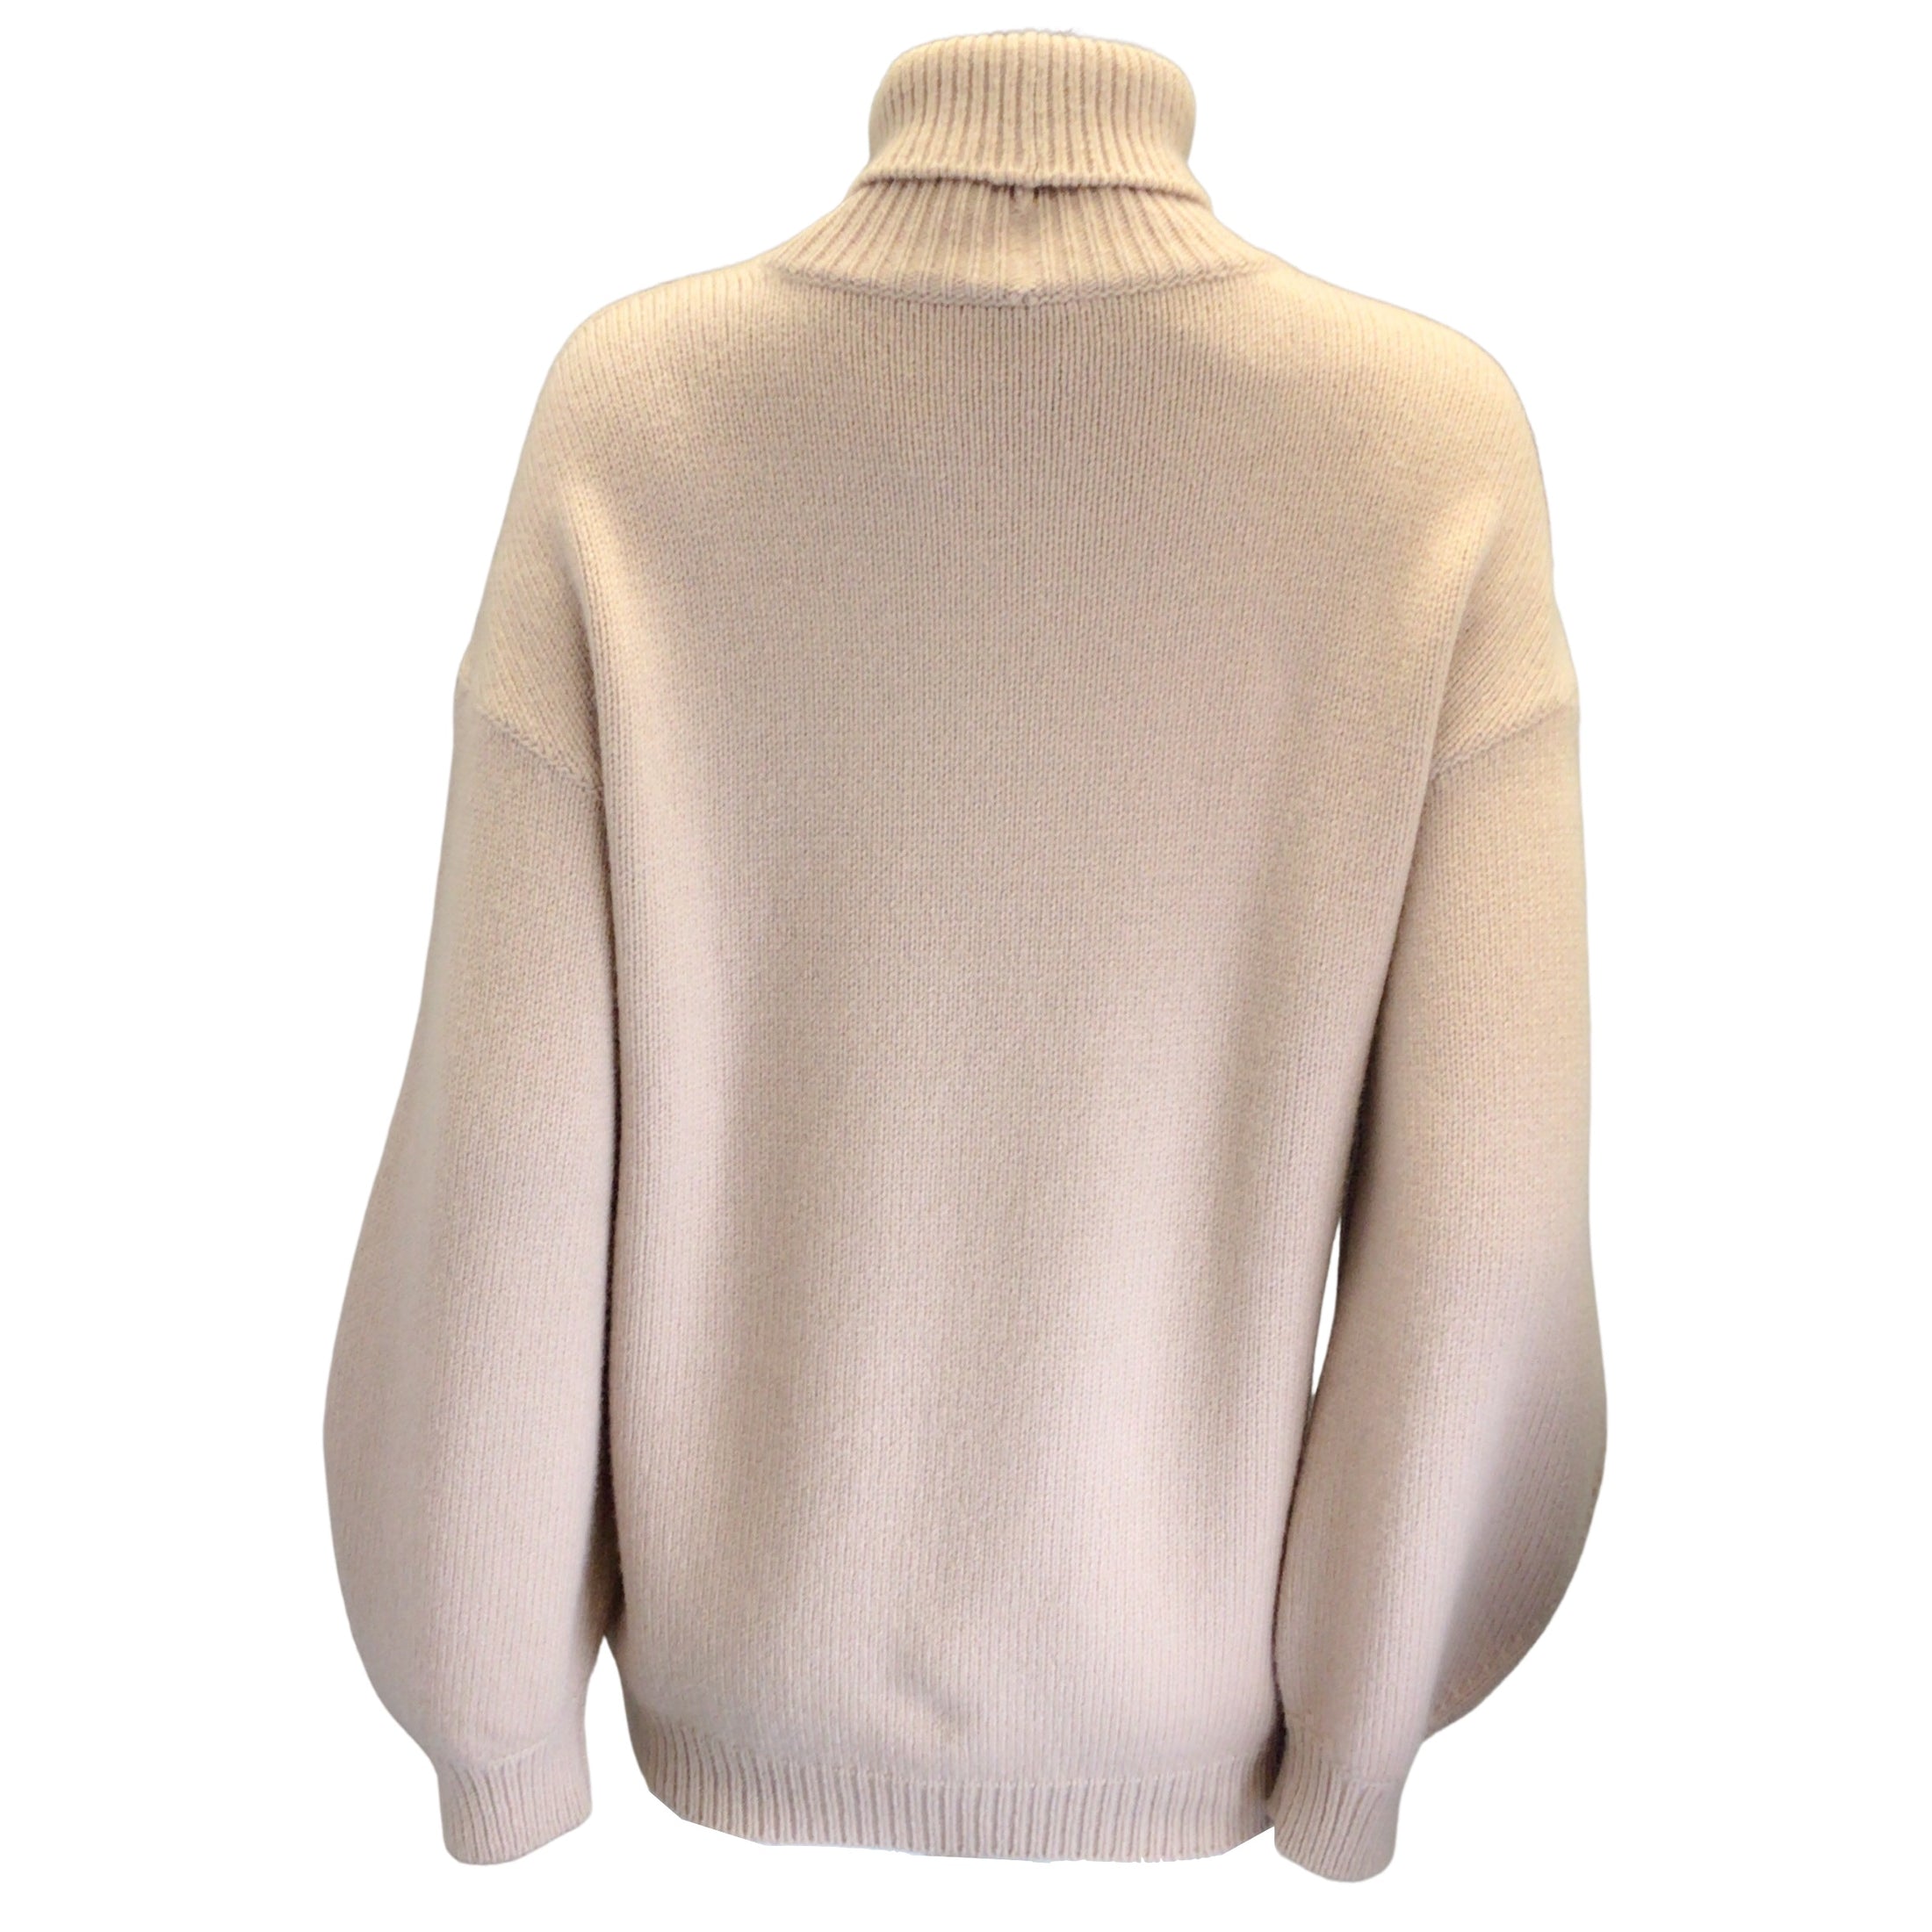 Chanel Nude Beige 2016 Long Sleeved Turtleneck Wool and Cashmere Knit Pullover Sweater